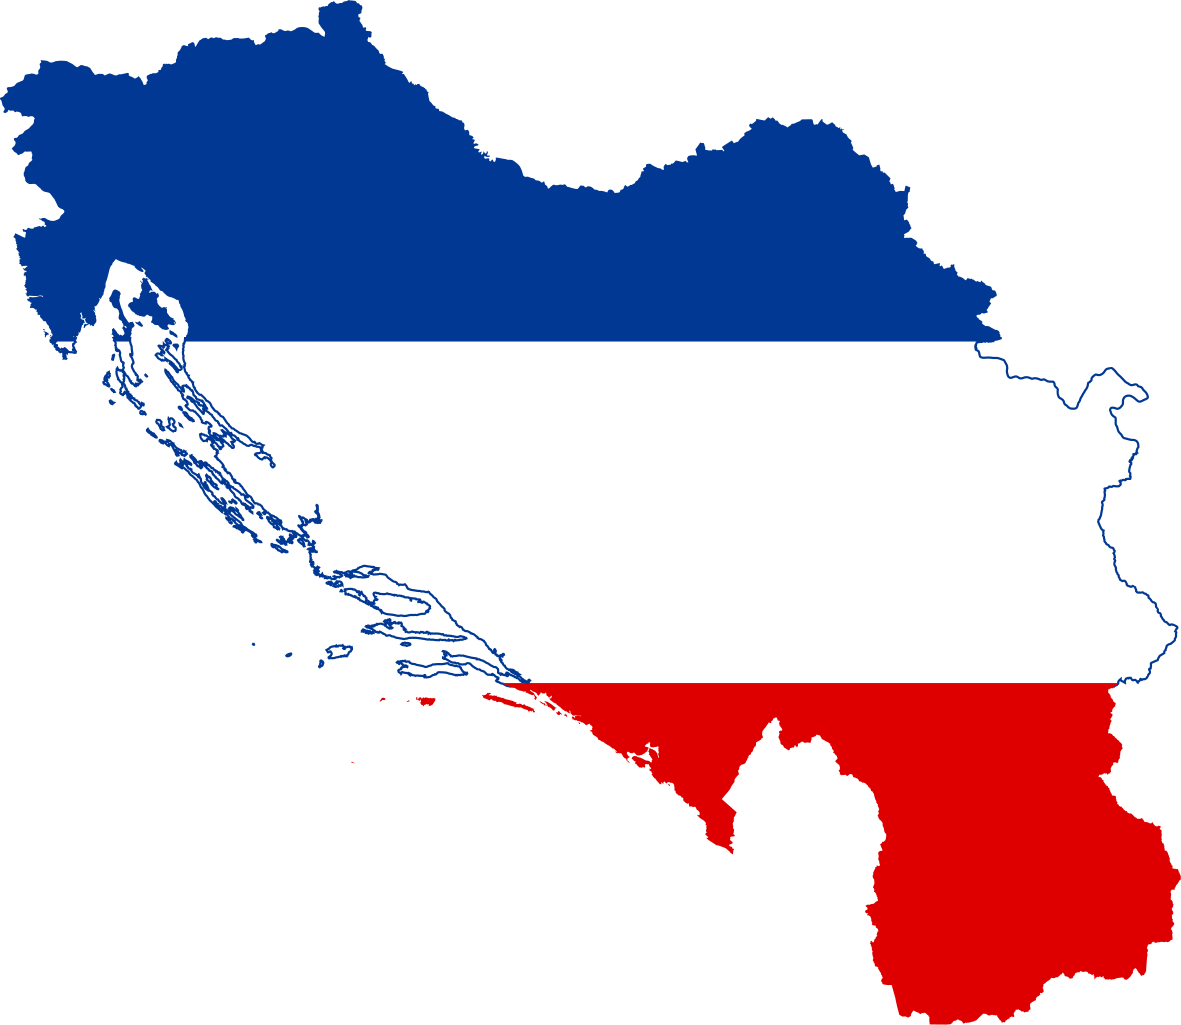 Download File:Flag-map of Yugoslavia (Neutral).svg - Wikimedia Commons